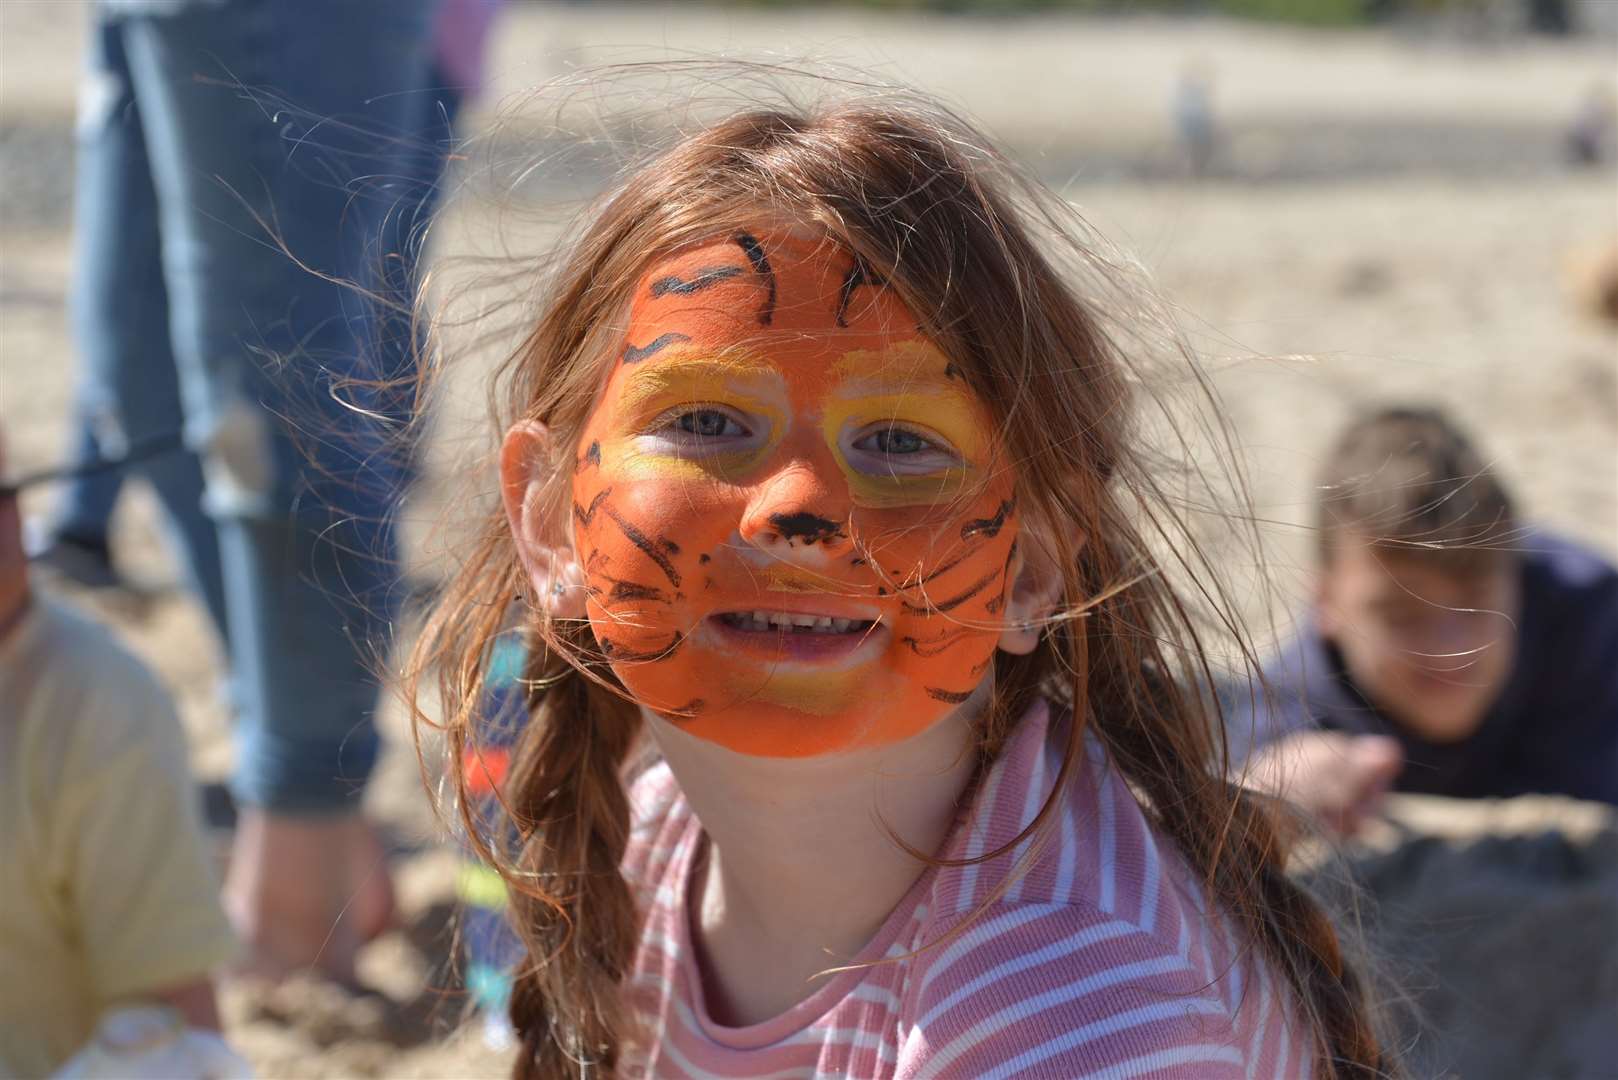 Lily Mackay was among the many children who had their faces painted at the beach event.